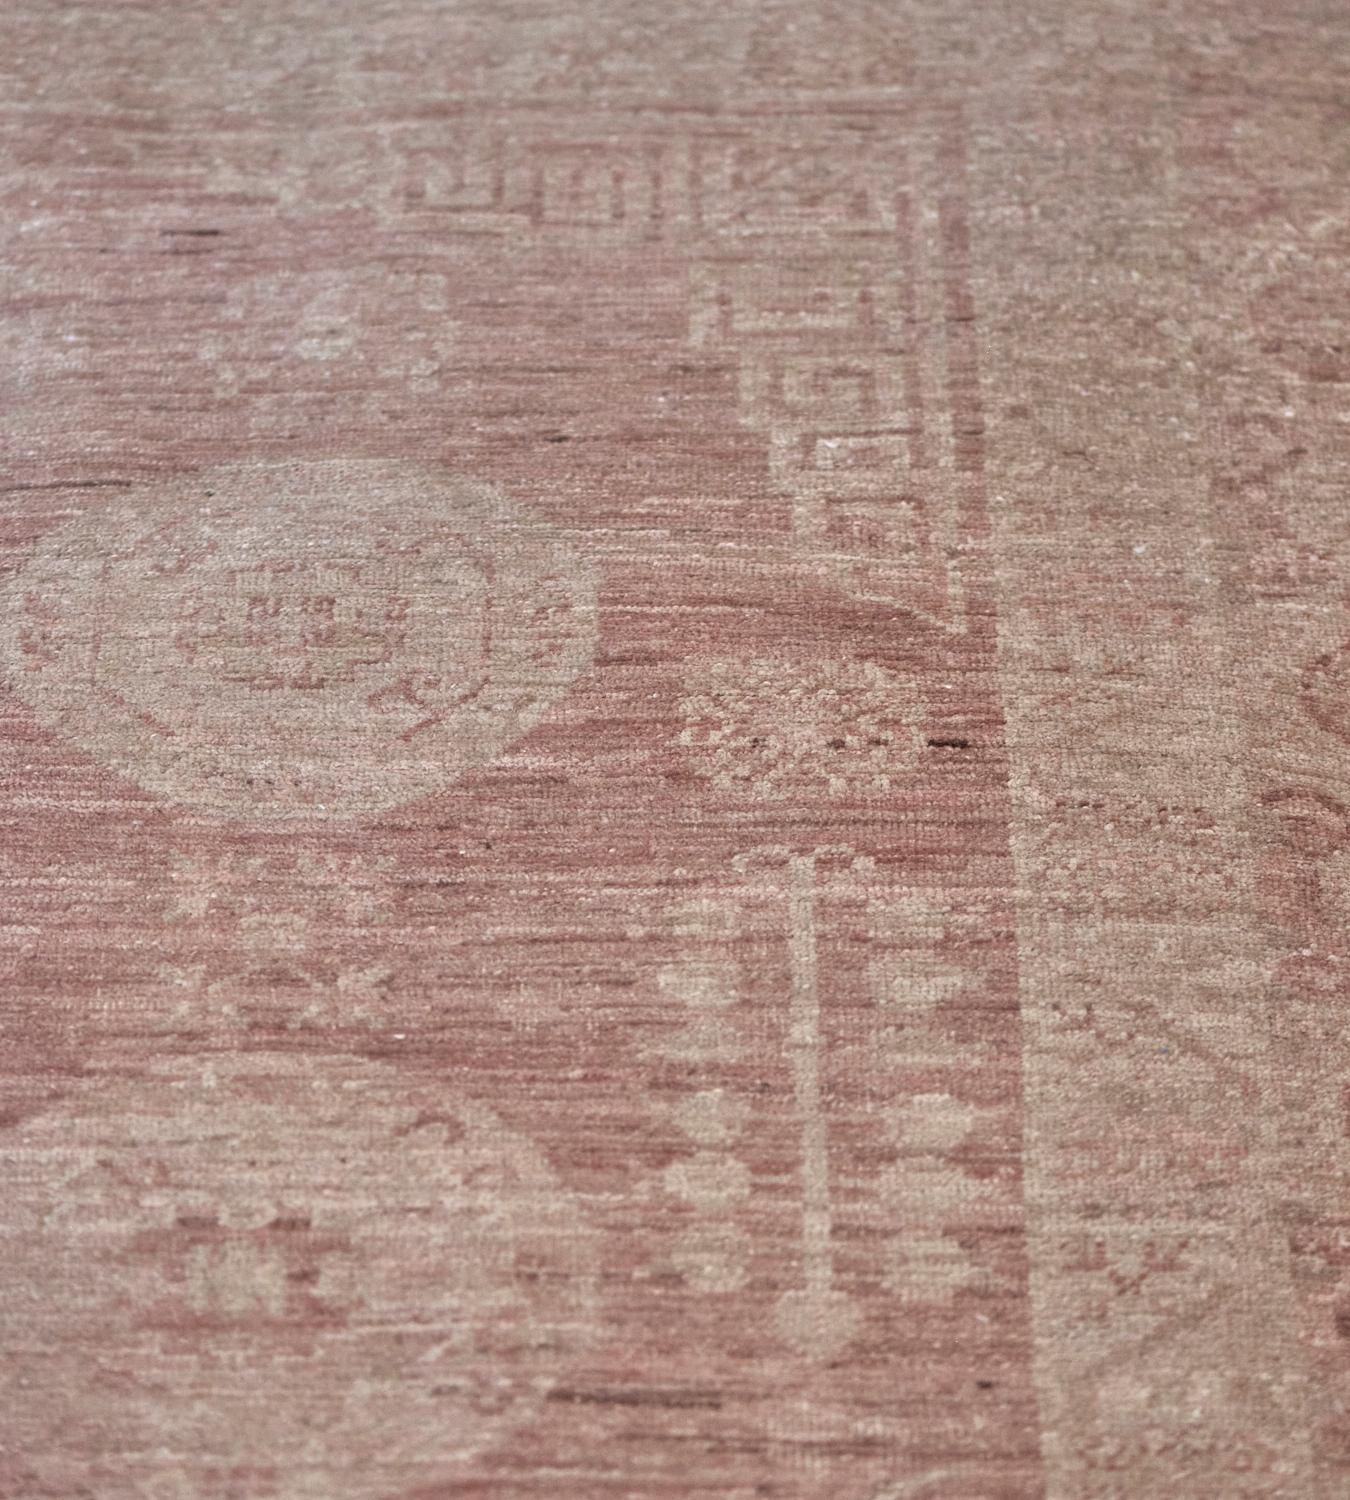 Dusty Rose Handwoven Revival Khotan Rug In Excellent Condition For Sale In West Hollywood, CA